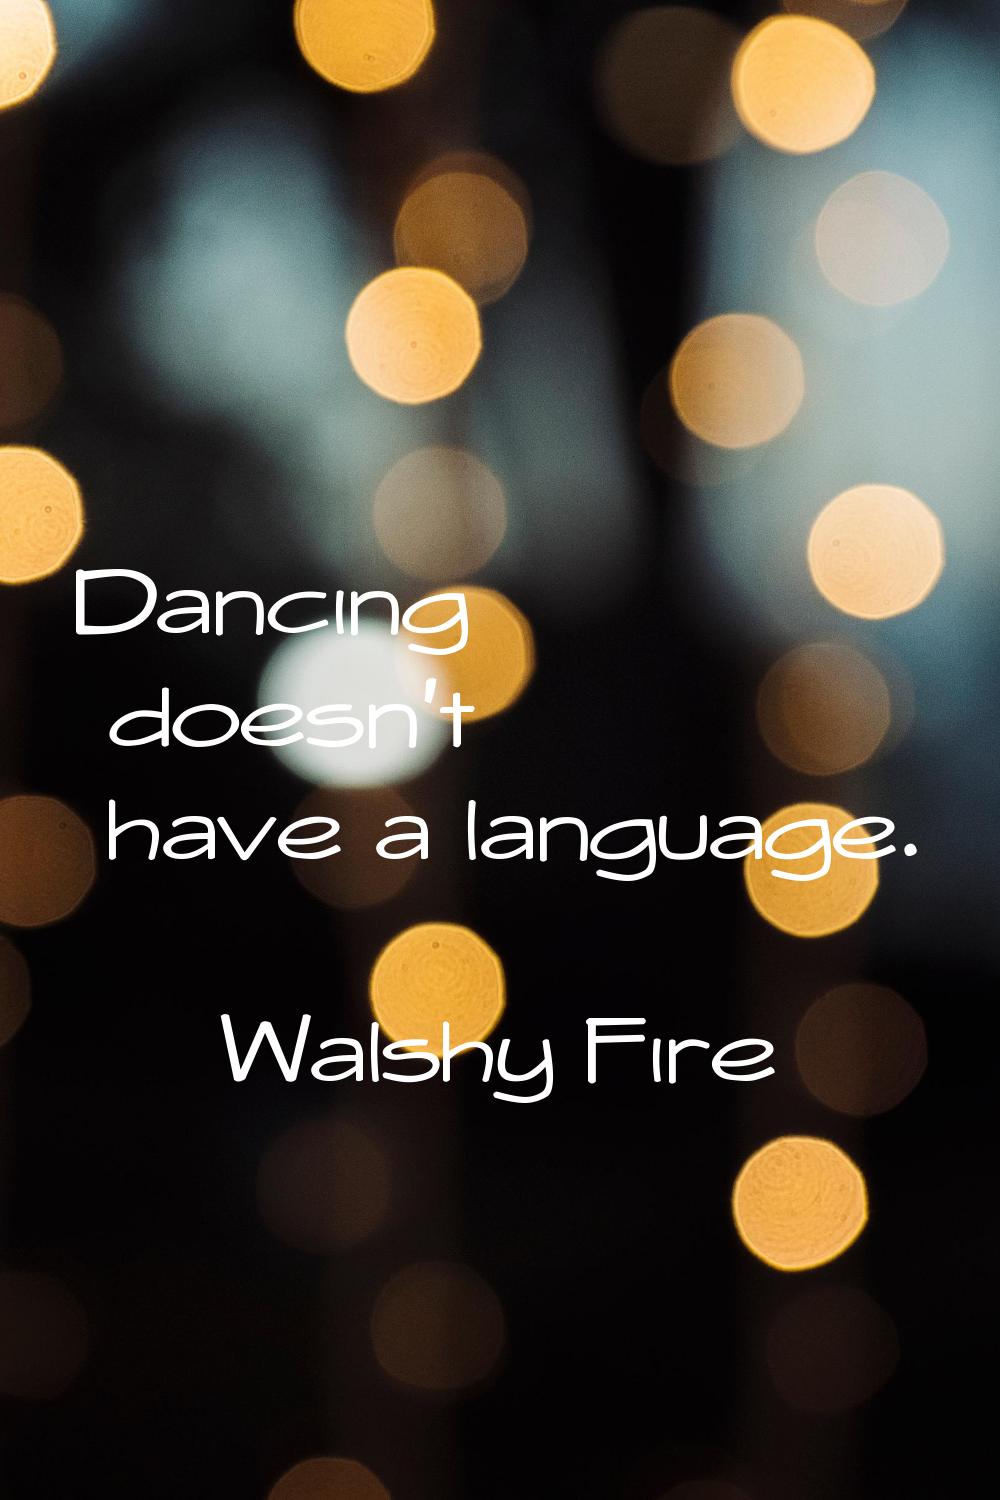 Dancing doesn't have a language.